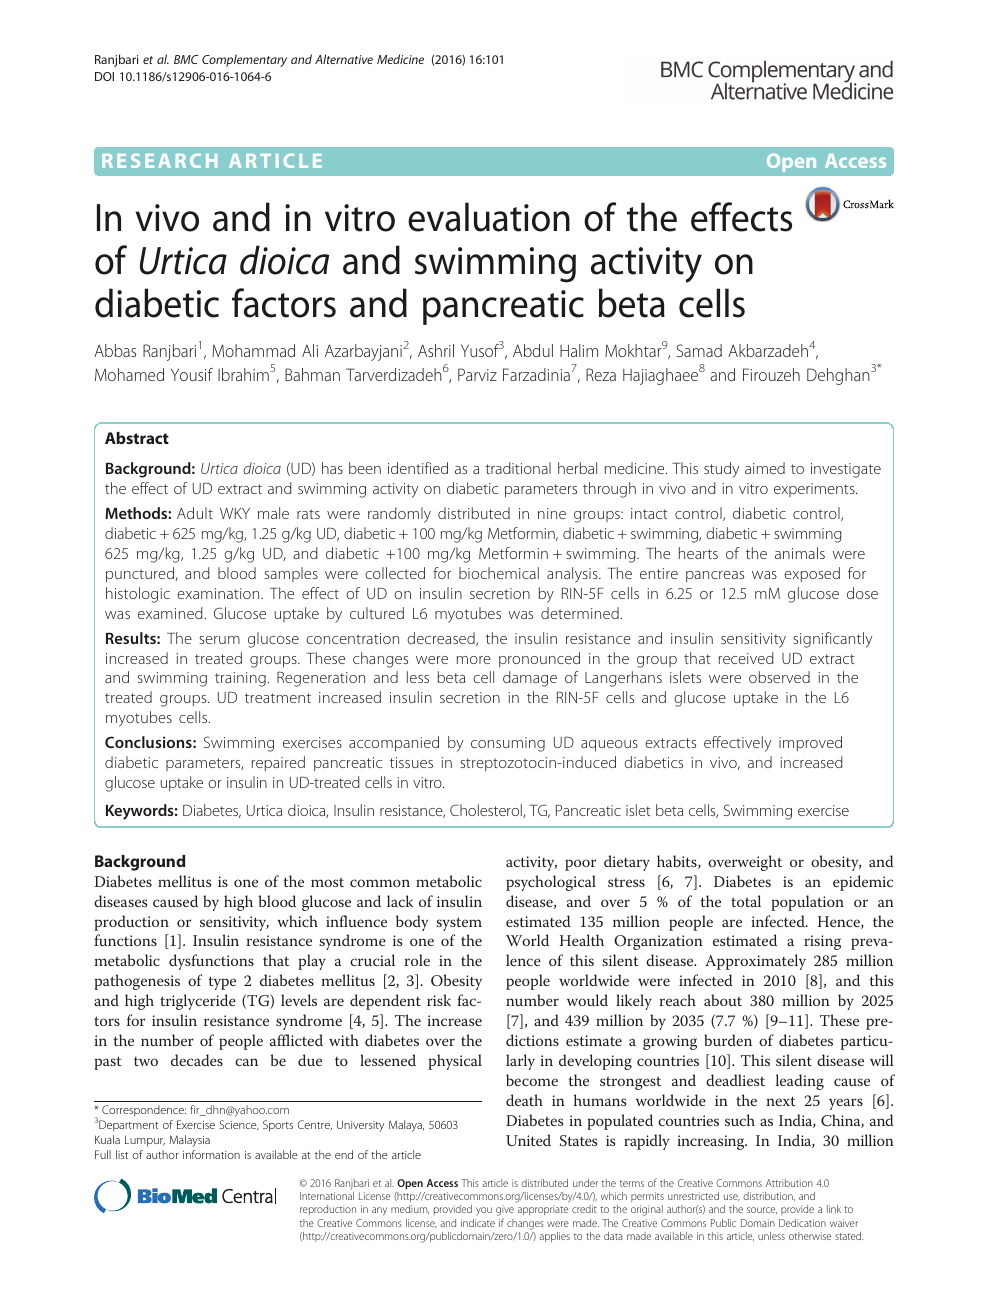 In Vivo And In Vitro Evaluation Of The Effects Of Urtica Dioica And Swimming Activity On Diabetic Factors And Pancreatic Beta Cells Topic Of Research Paper In Medical Engineering Download Scholarly